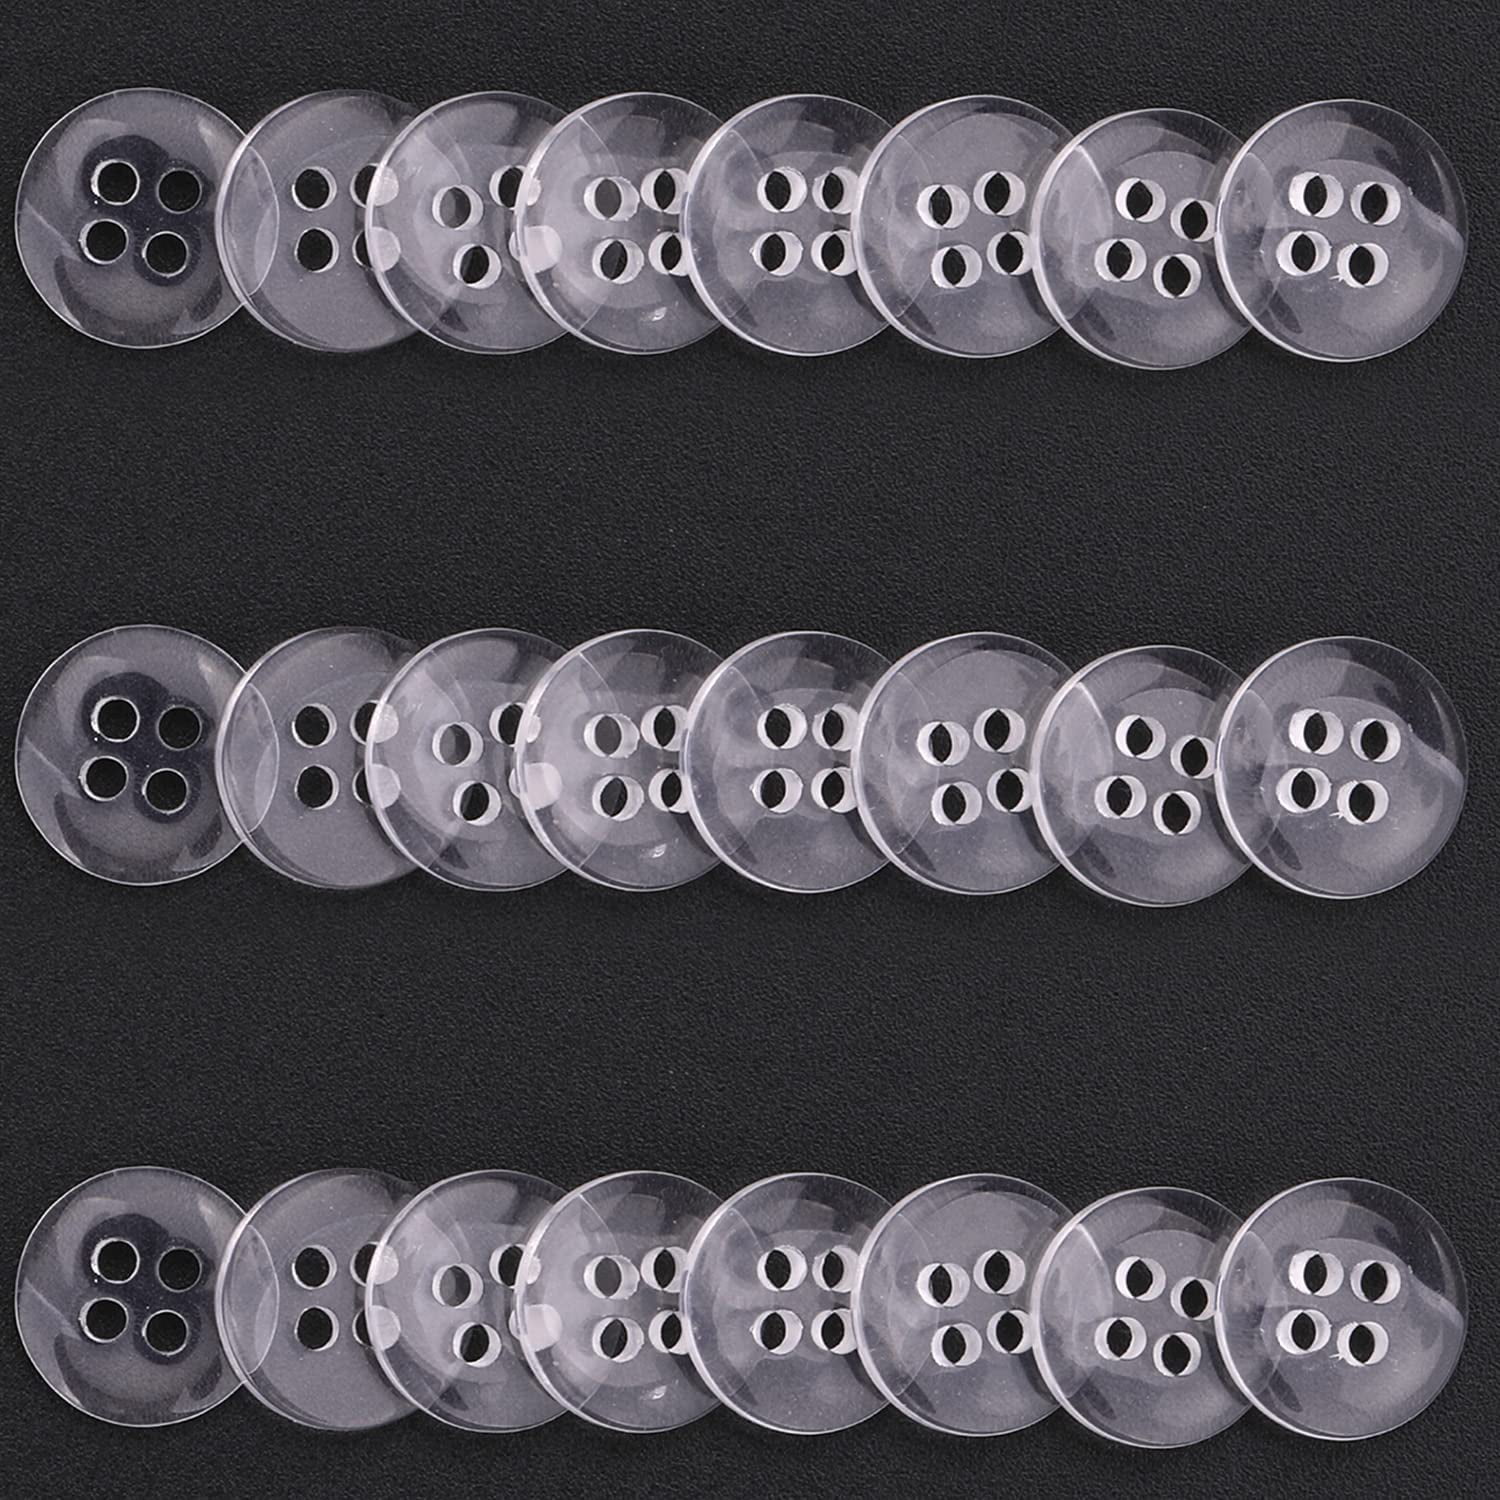 Trimming Shop Round Plastic Buttons 4 Holes for Sewing Clothing, Sewing  Crafts, Children's Handmade Decoration, Knitting, DIY Projects (15mm,  Clear, 100pcs) 